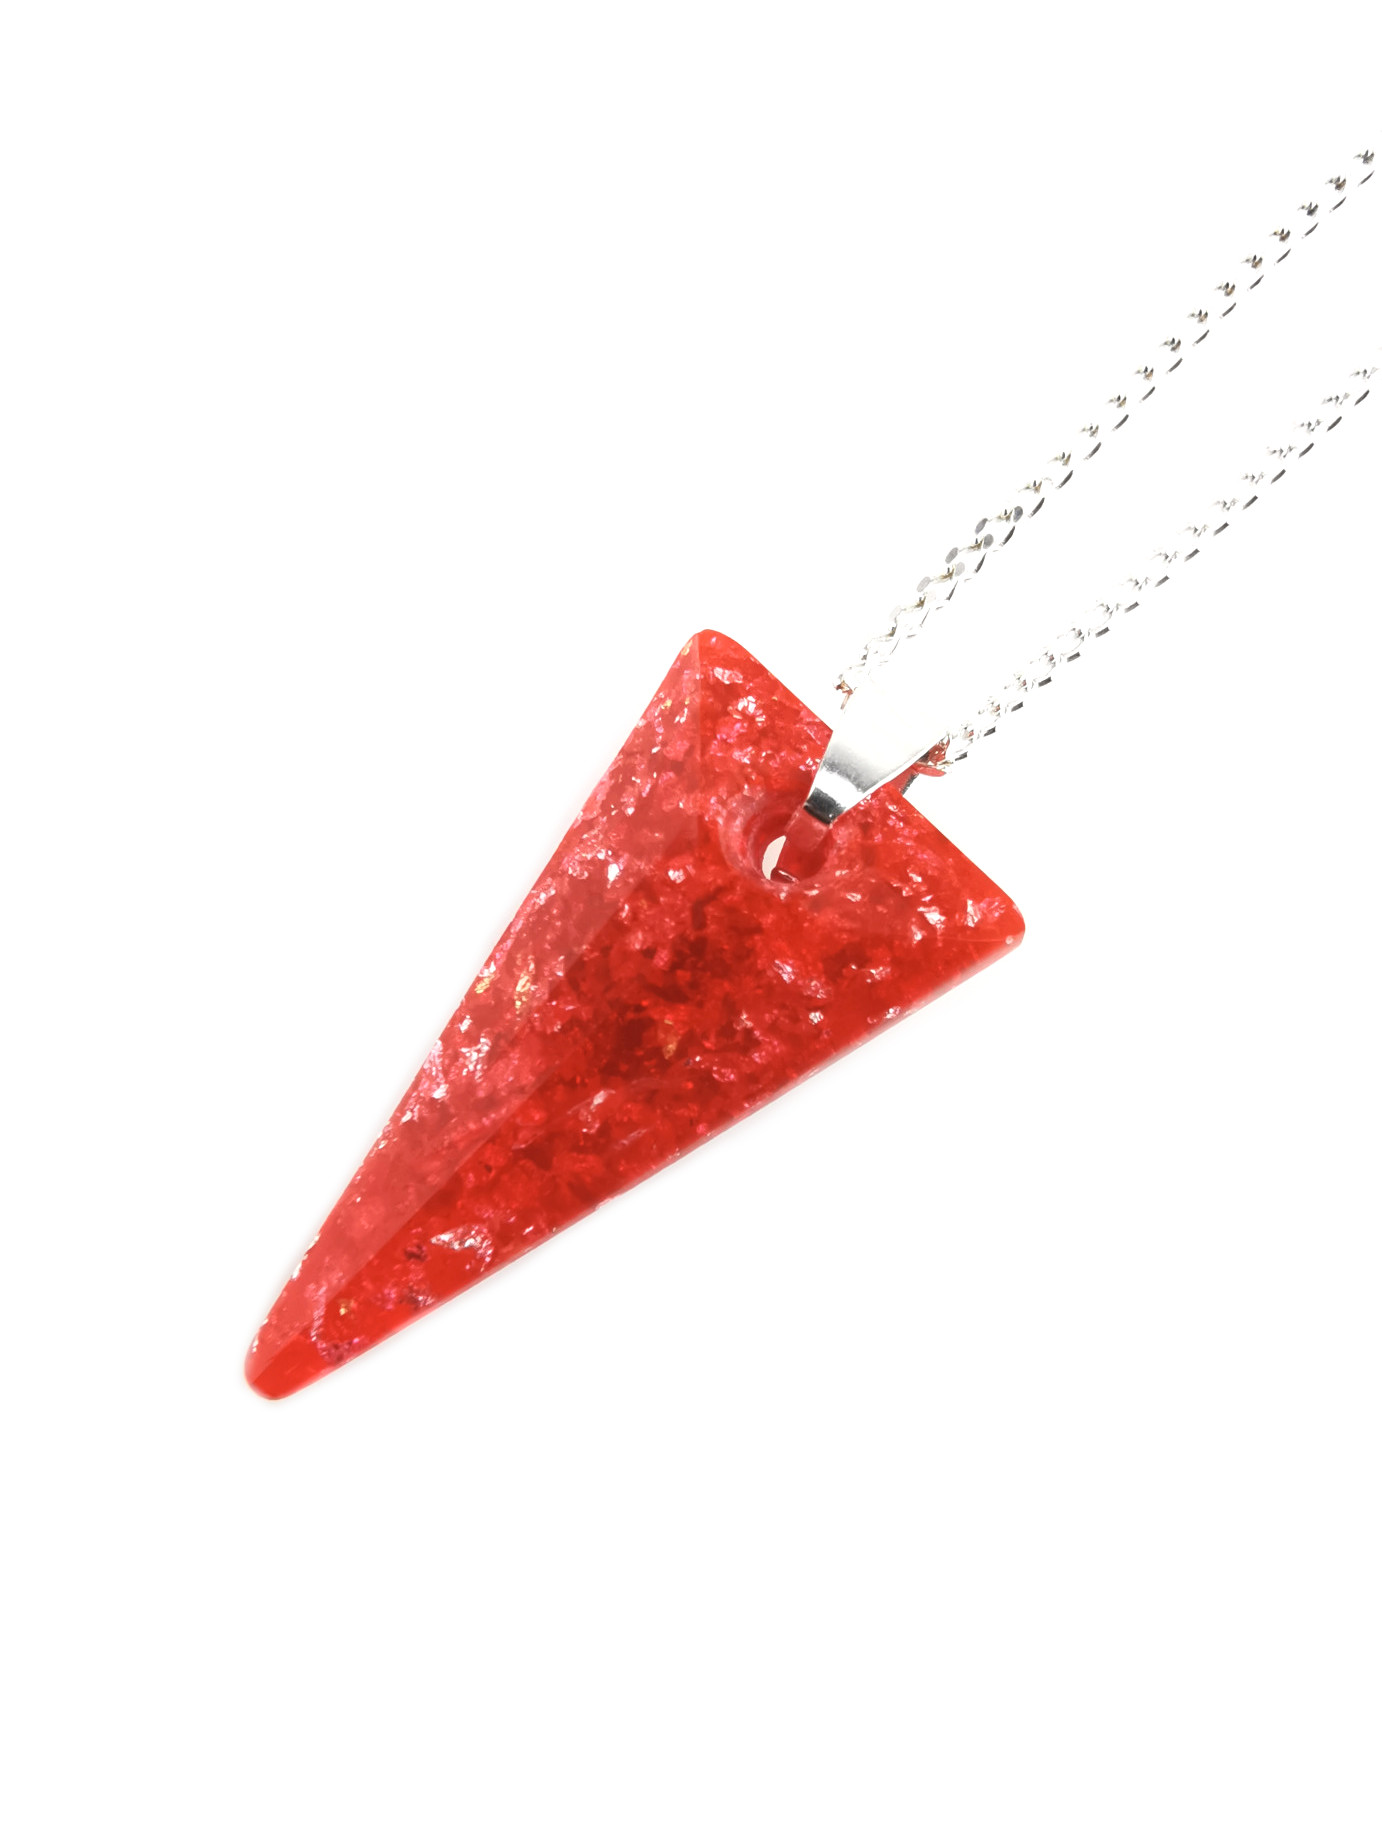 Red Spike Orgone Jewelry Pendant by OrgoneVibes